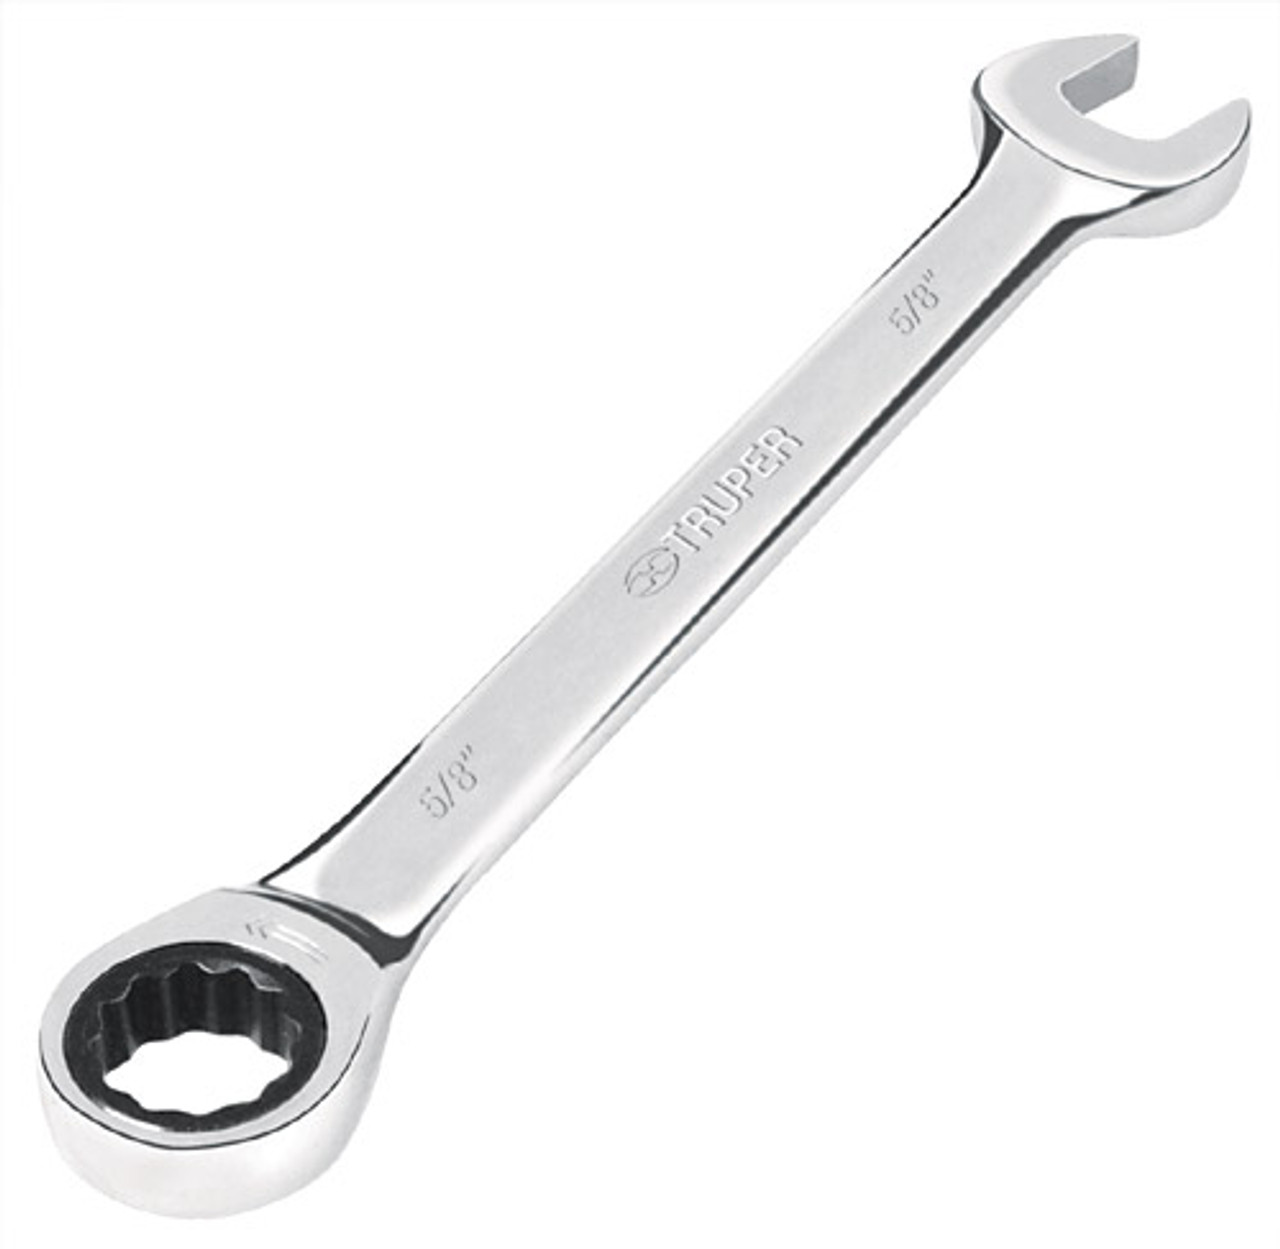 Truper 12mmx6.7" Combination Ratcheting Wrench #15744-2 Pack